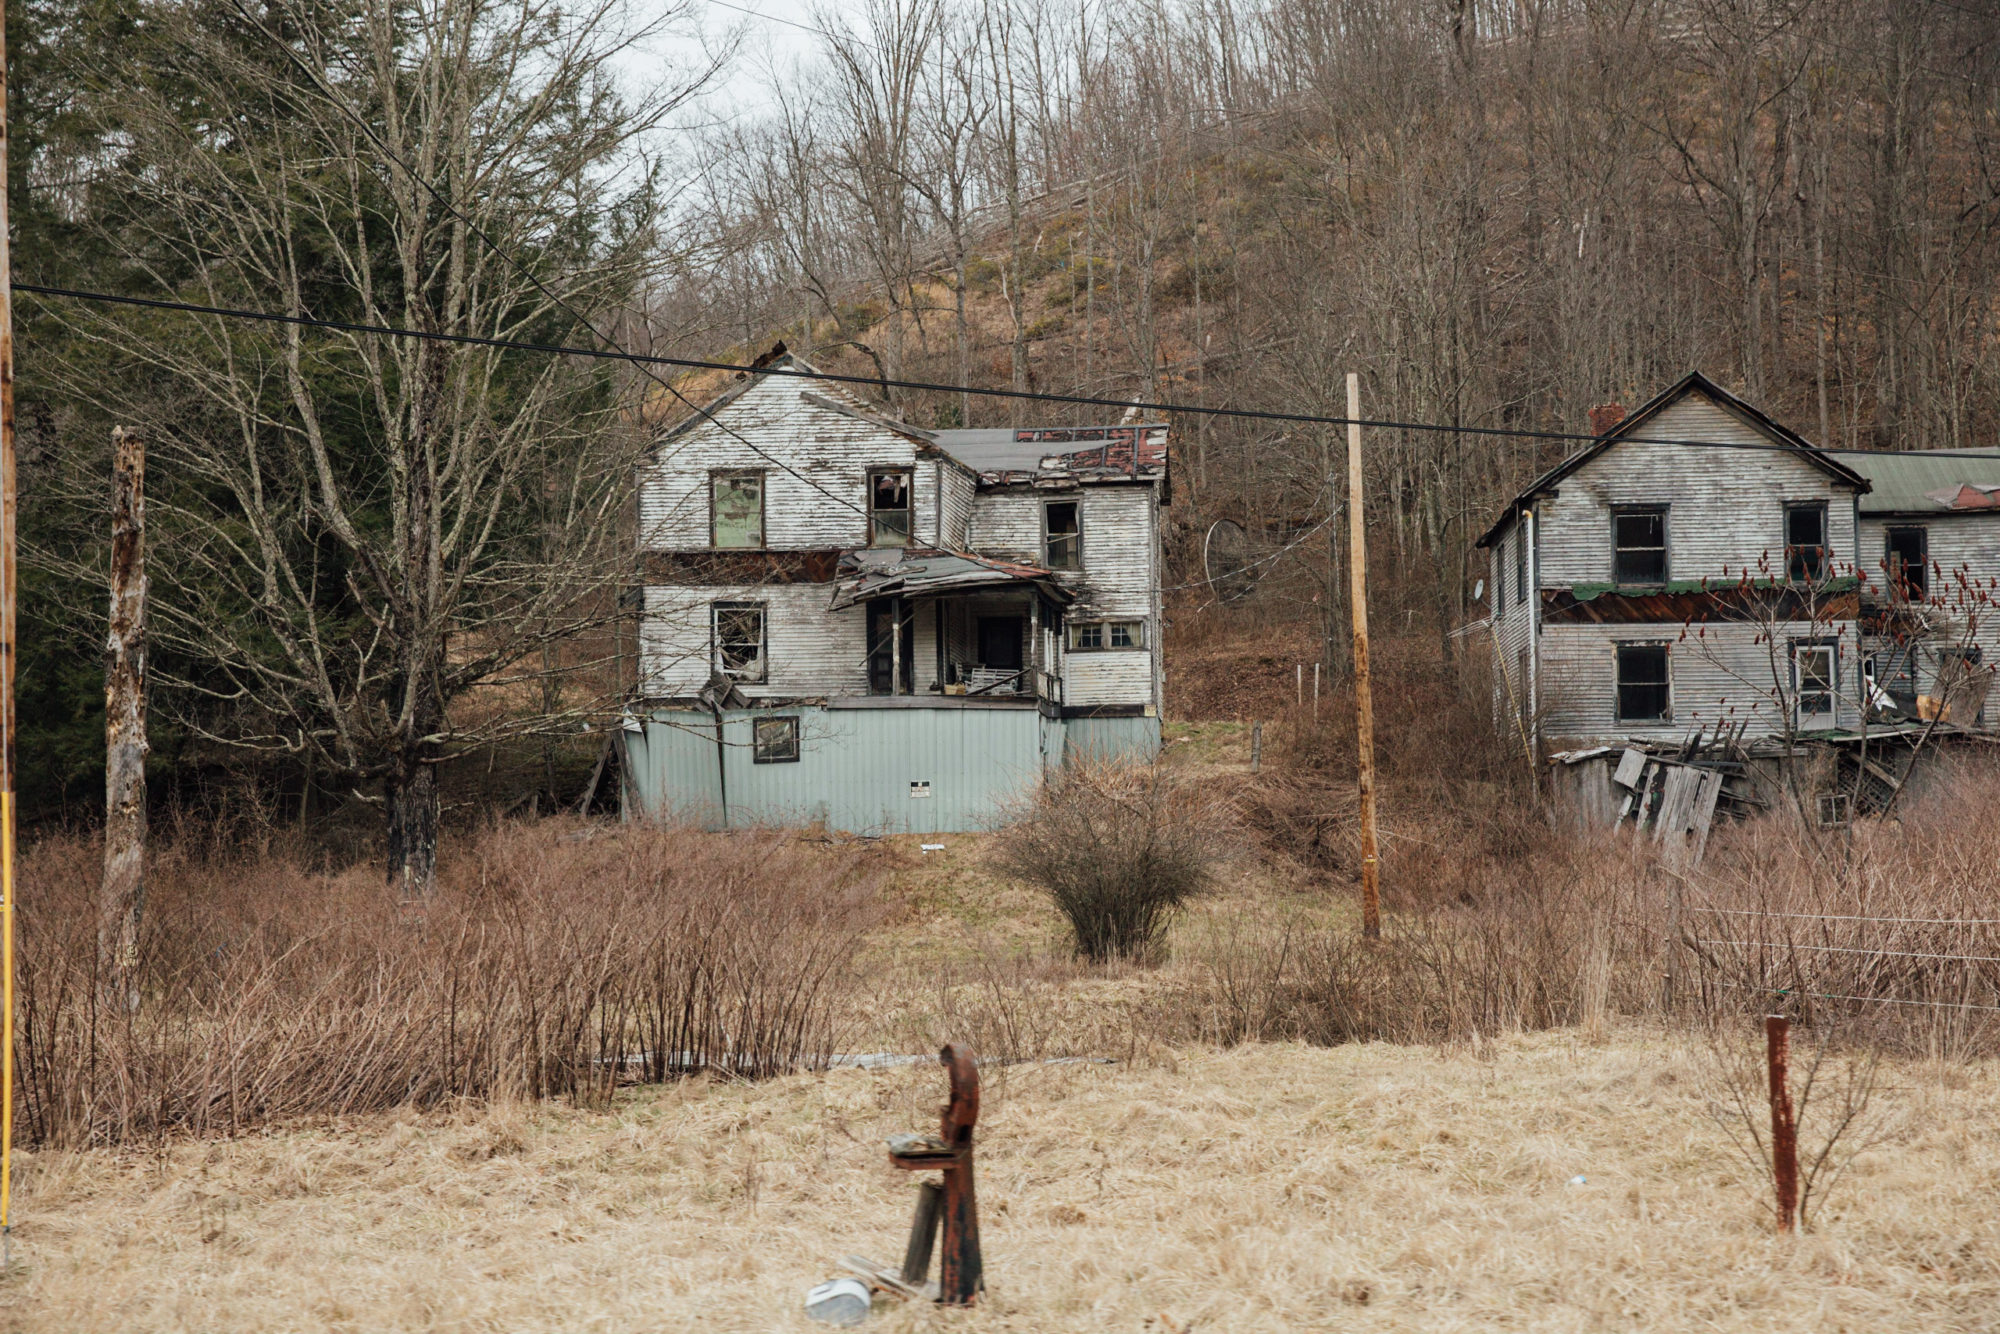 Treatment policies are turning West Virginia into Almost Hell